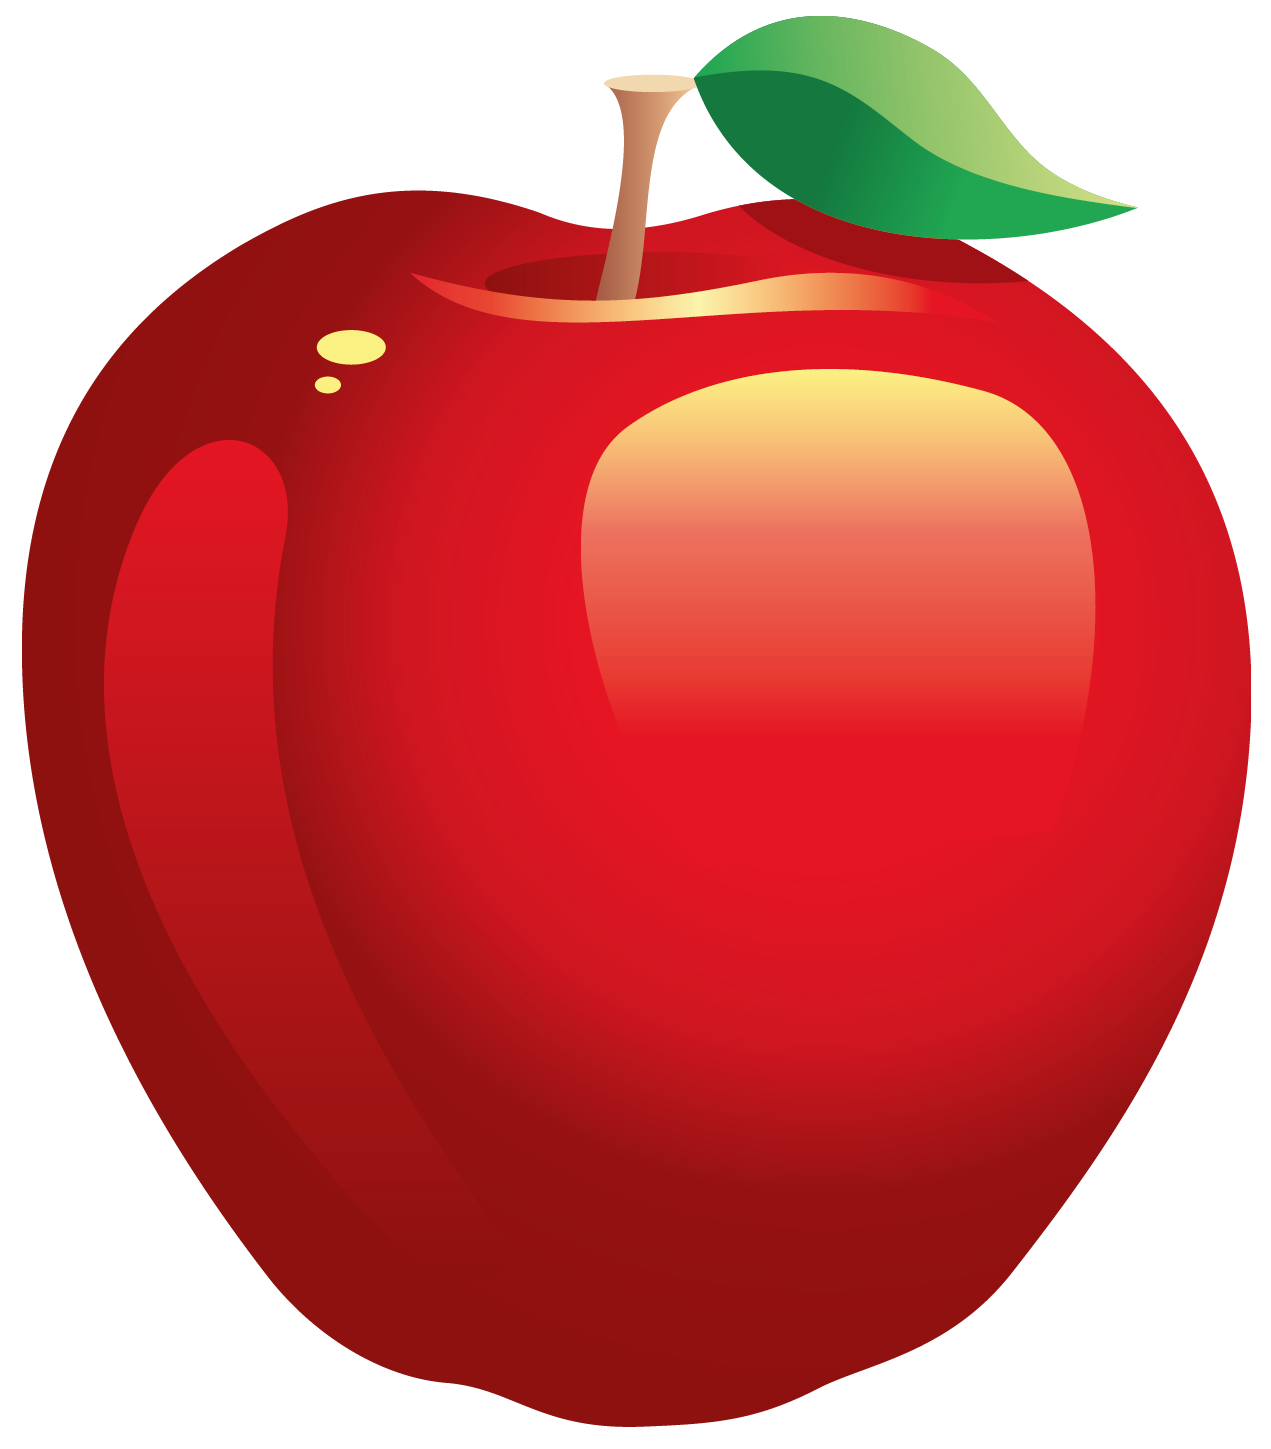 clip art apple free clipart WikiClipArt